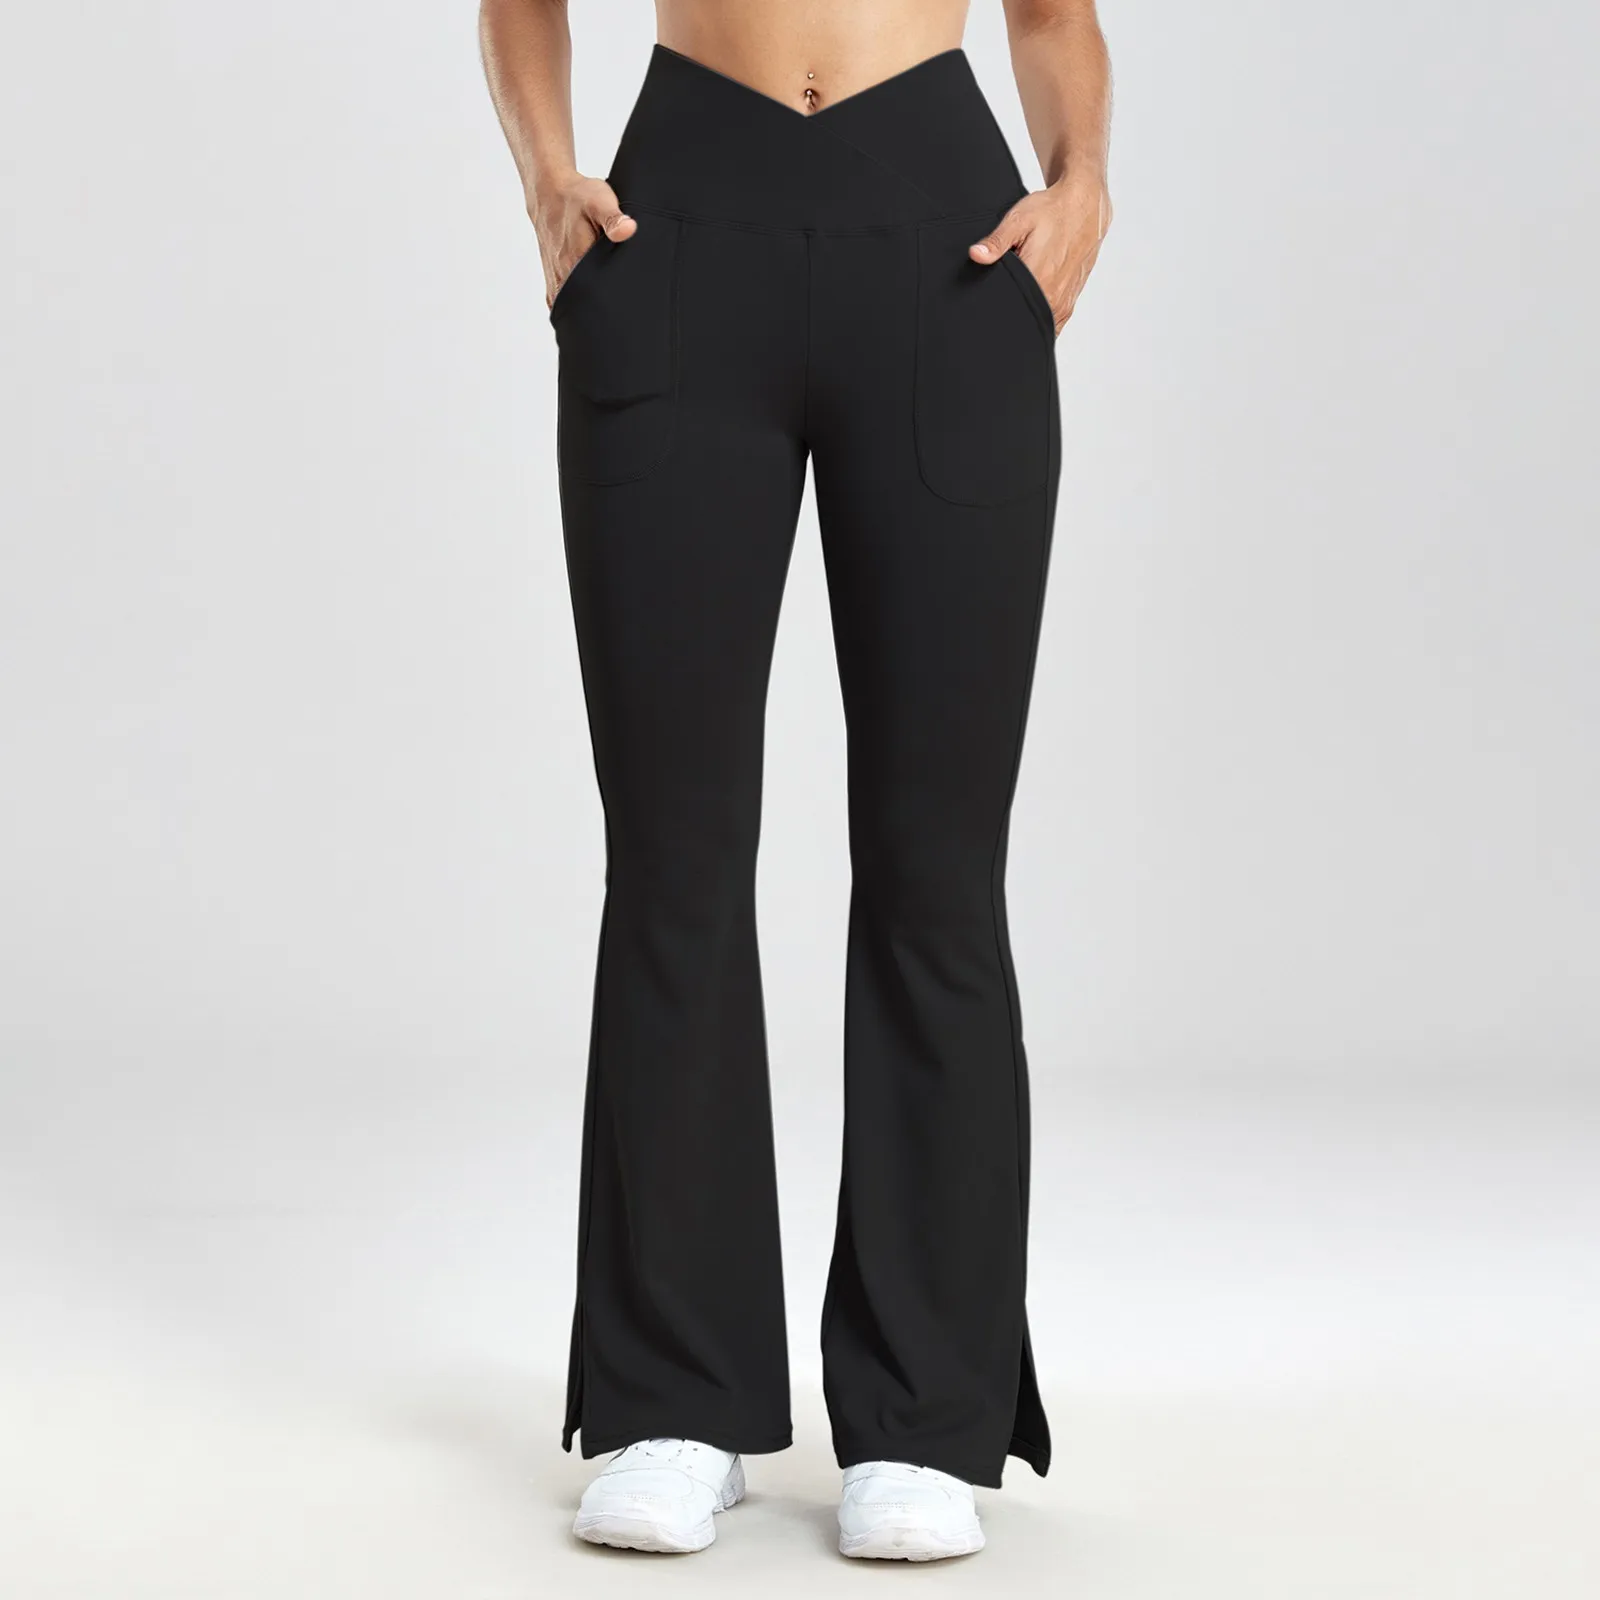 

Women Nude Tight Dance Wide Leg Pants With Raised Hips And High Waist Casual Flare Pants Fitness Sports Yoga Pants Low Split